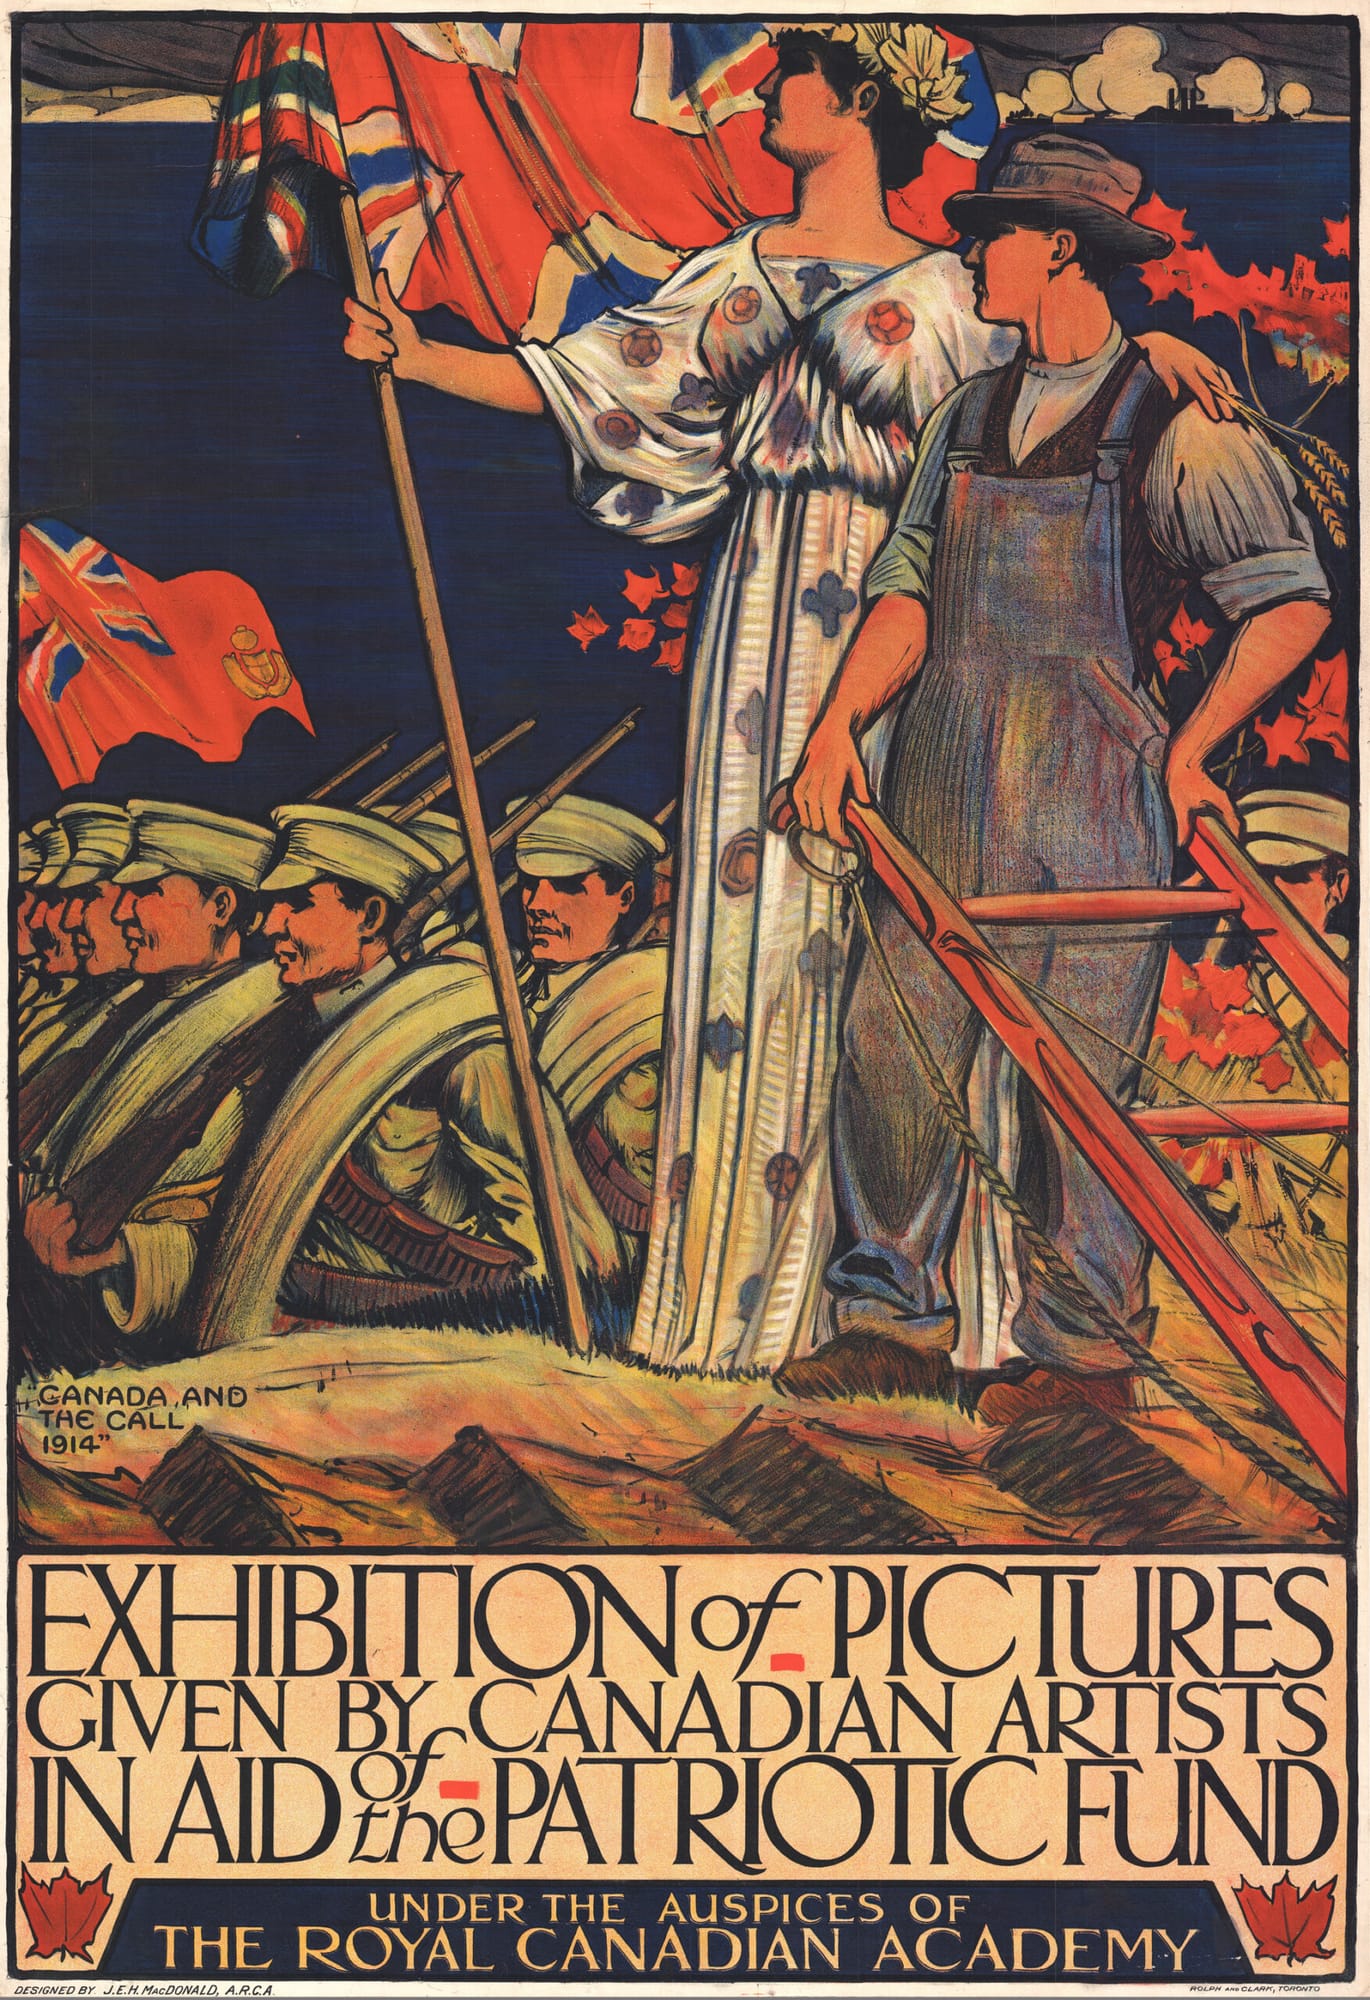 Canada and the Call, 1914